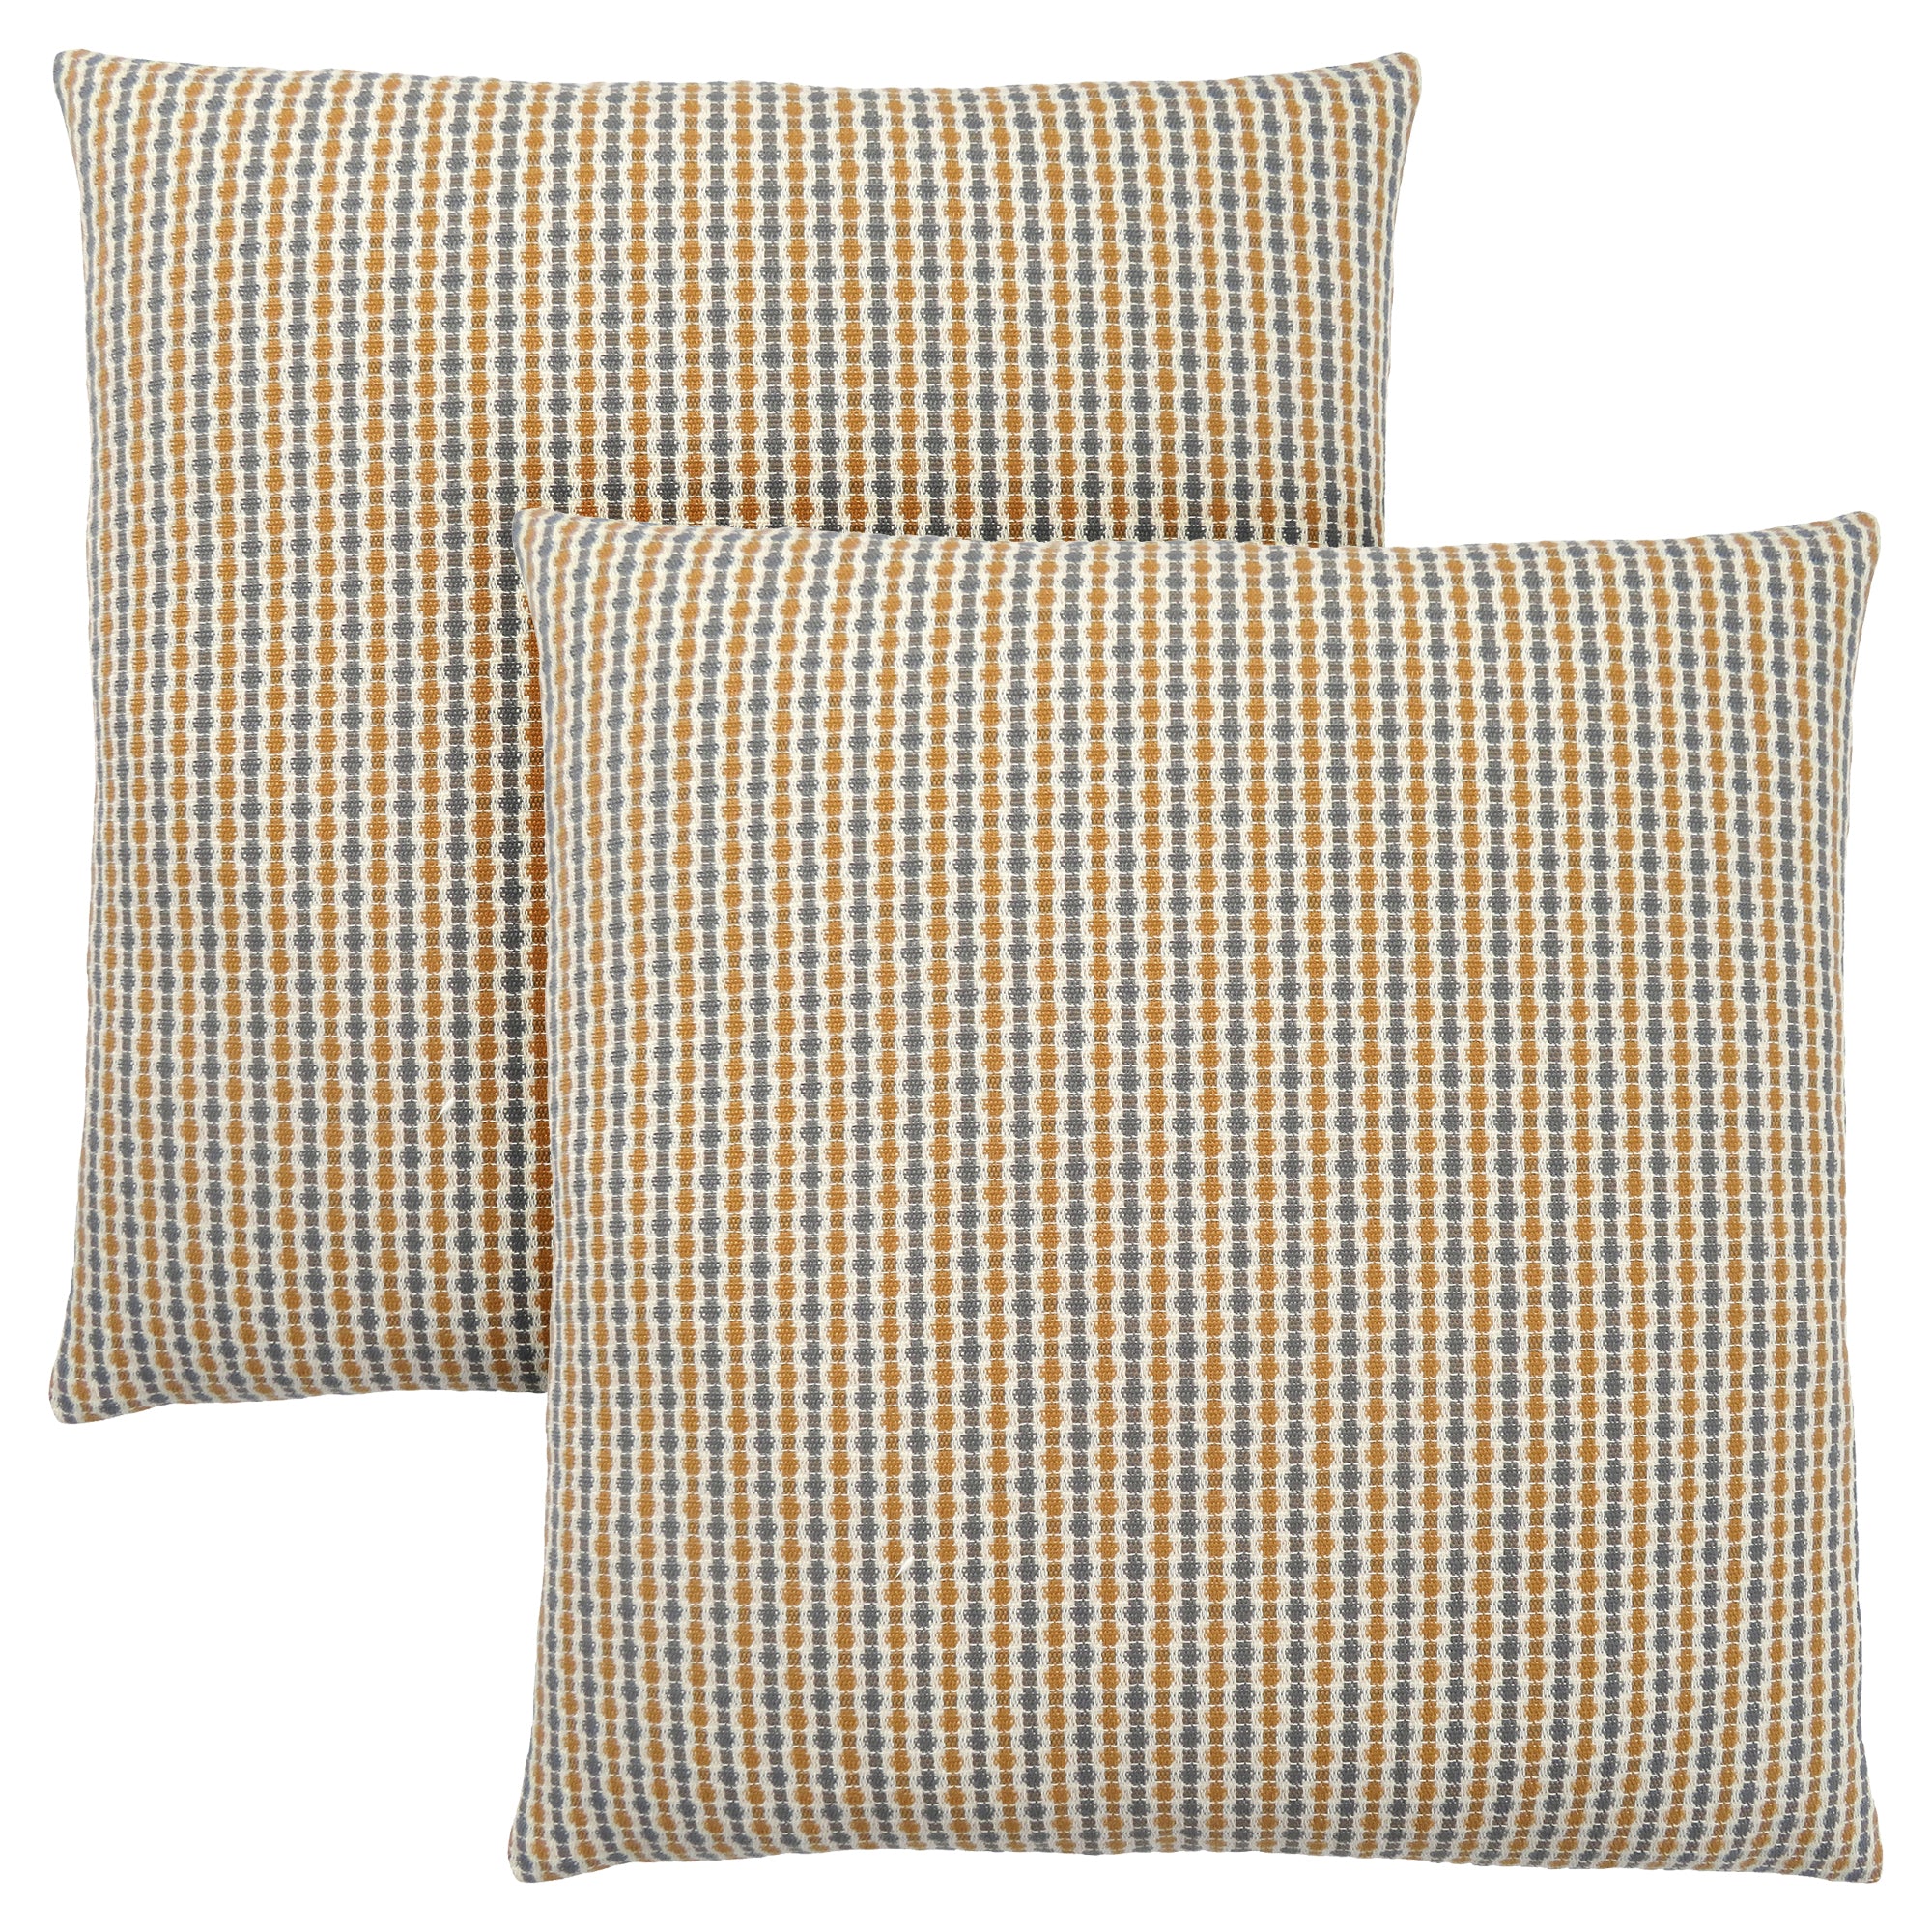 MN-479235    Pillows, Set Of 2, 18 X 18 Square, Insert Included, Decorative Throw, Accent, Sofa, Couch, Bed, Soft Polyester Woven Fabric, Hypoallergenic Soft Polyester Insert, Gold And Grey, Abstract Dot Design, Classic Dot Design, Classic